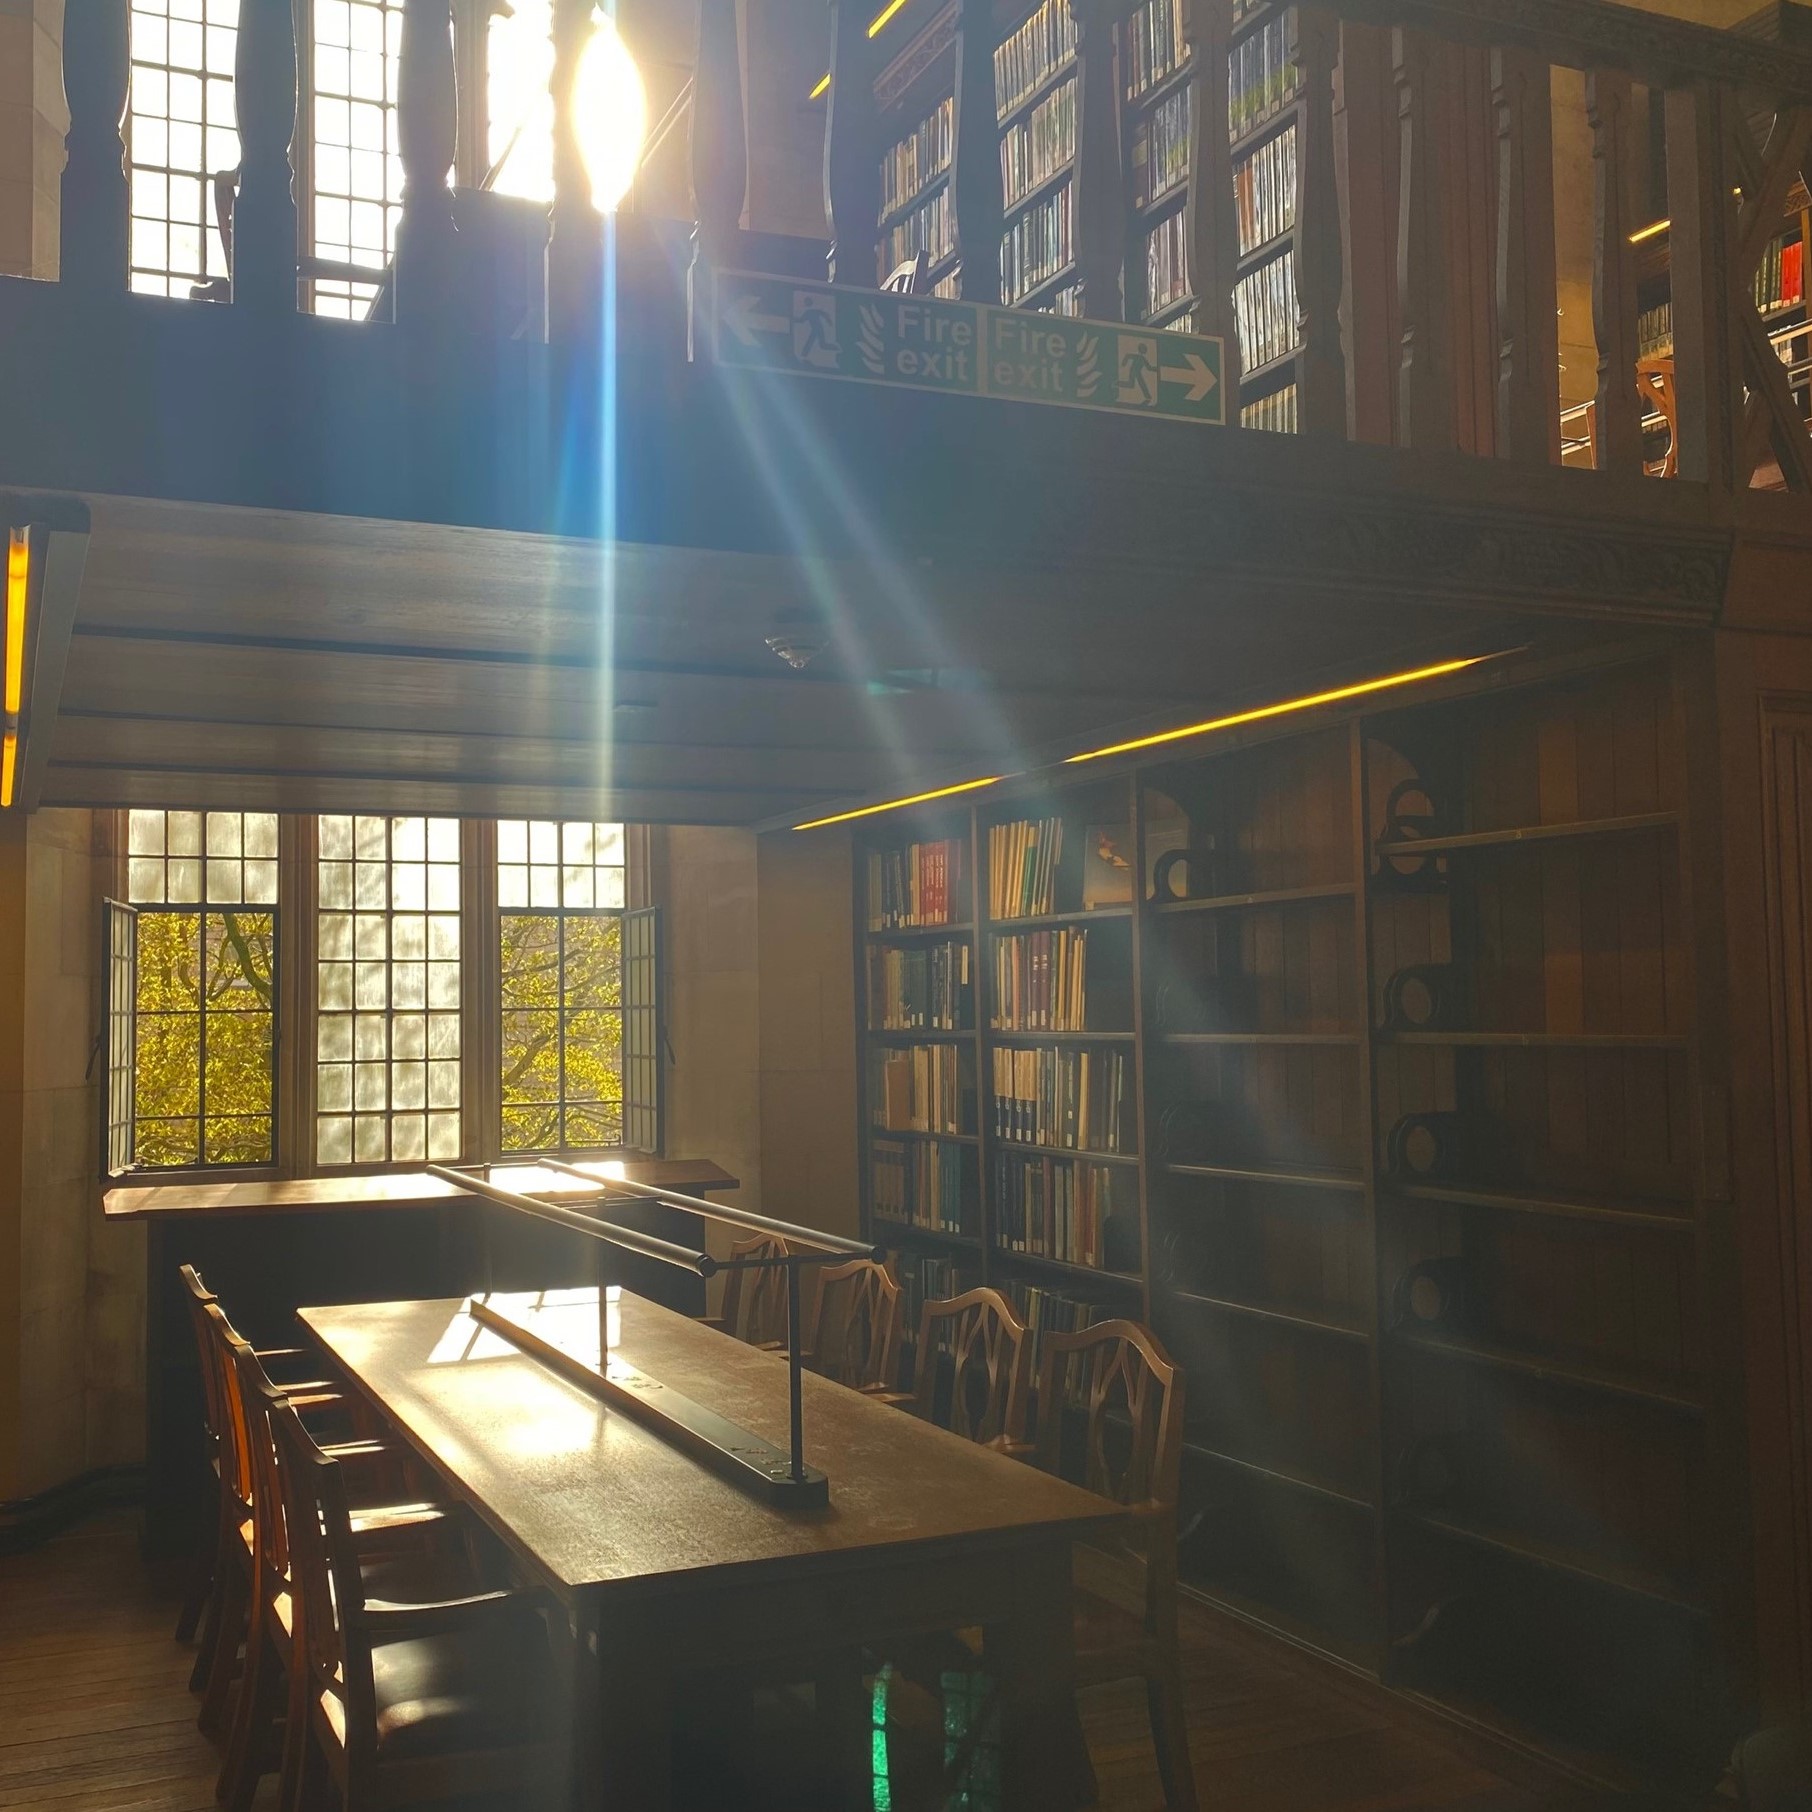 Wills library study desk with sun coming through window